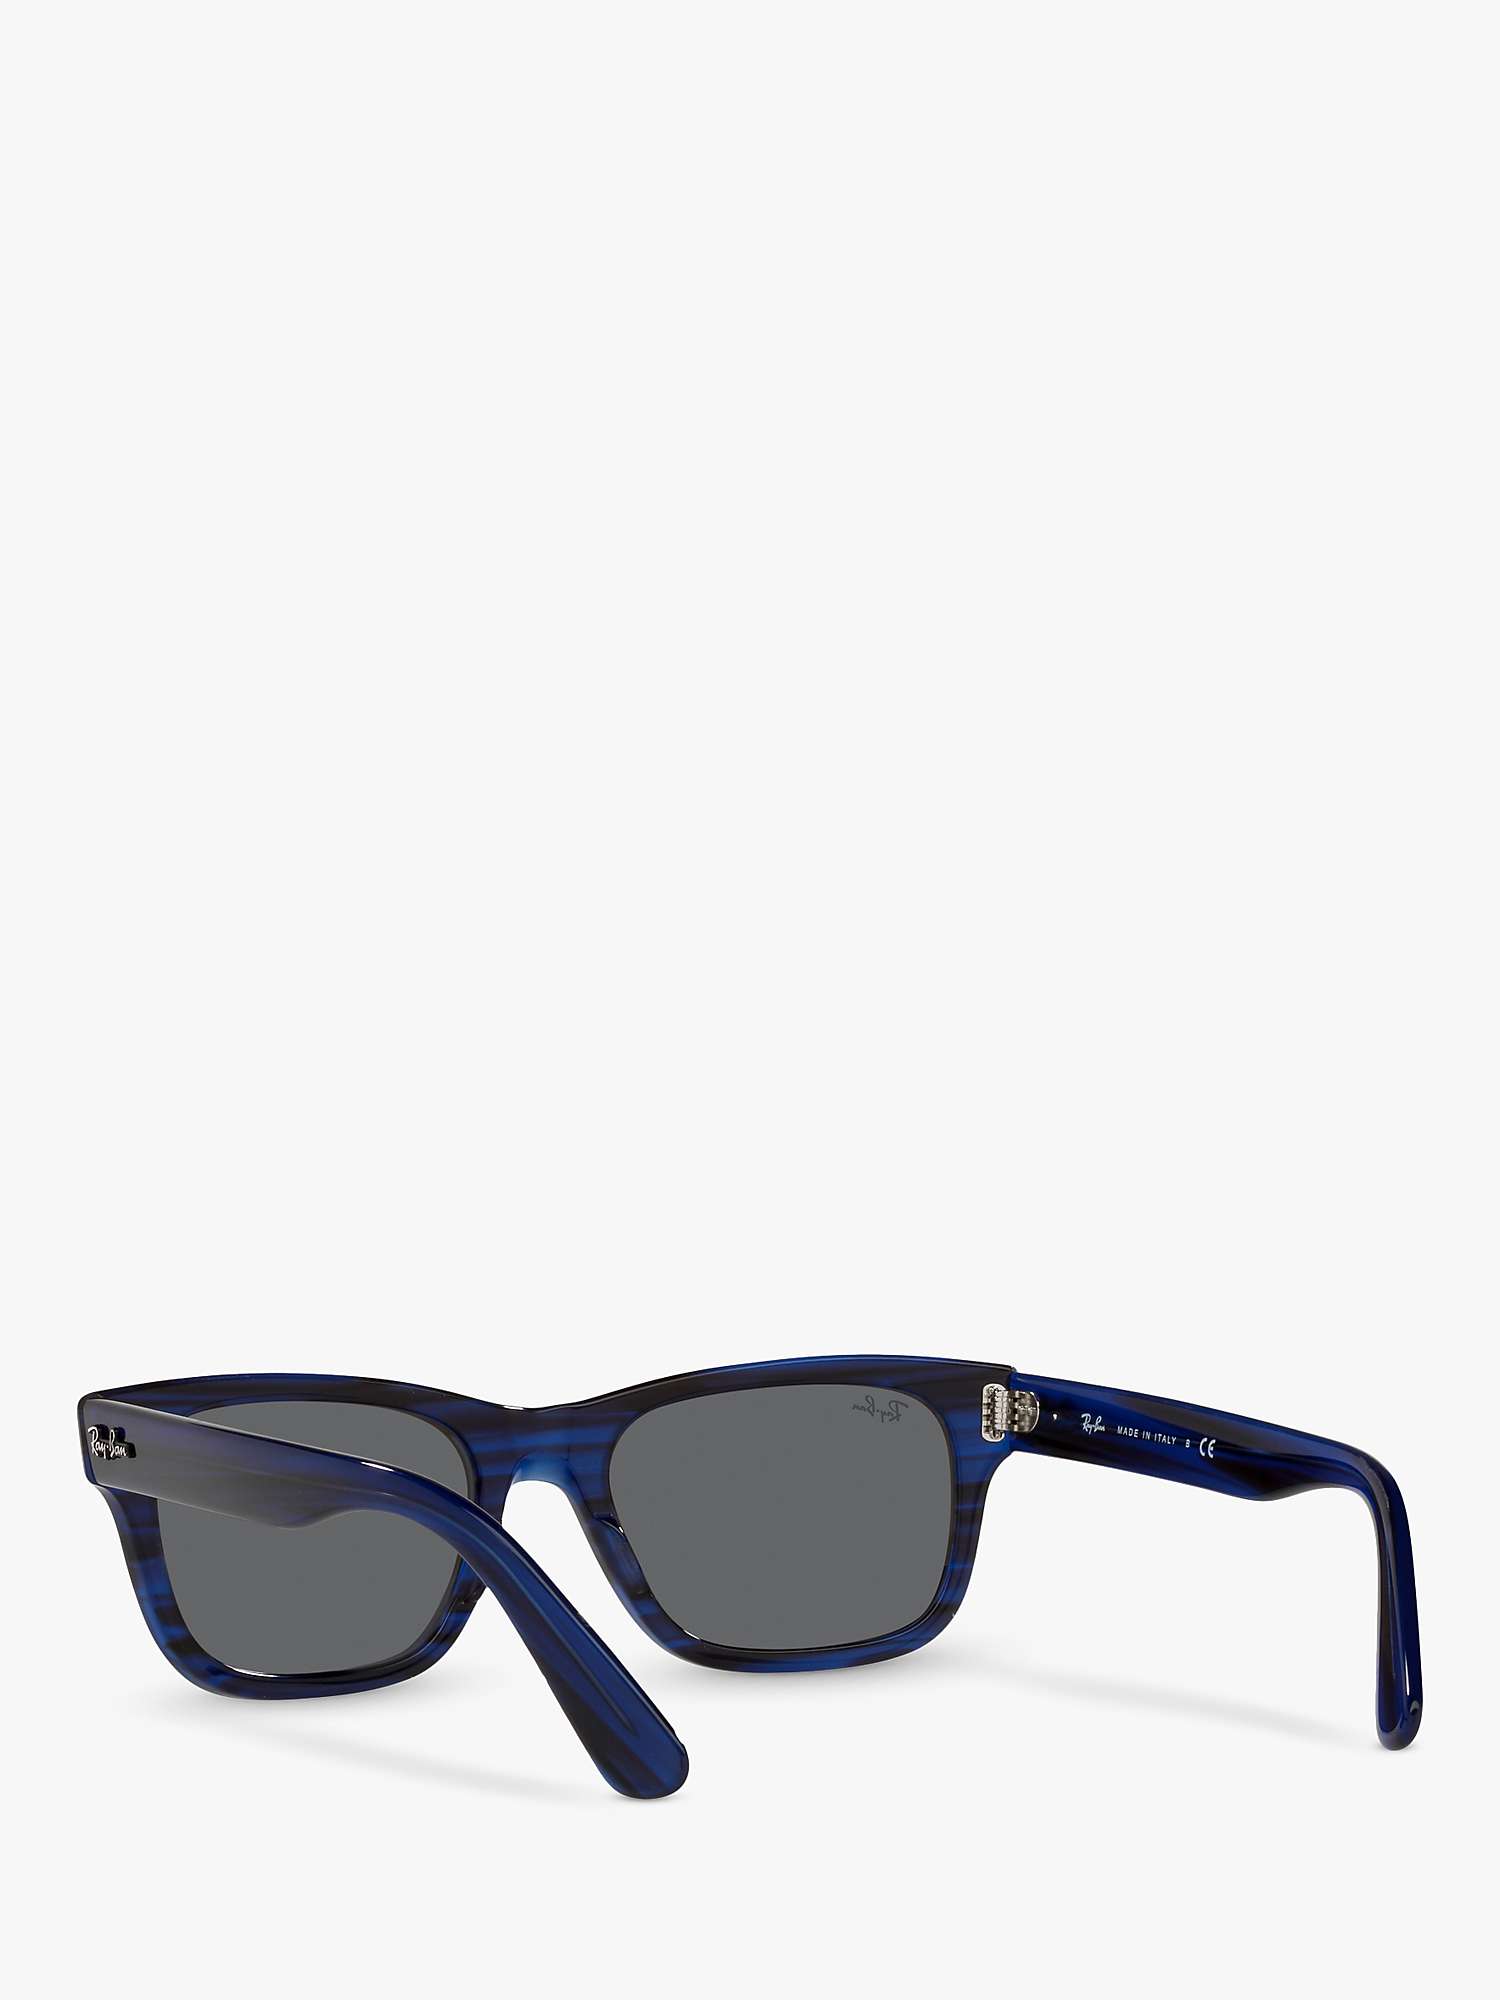 Buy Ray-Ban RB2283901 Men's Sunglasses, Striped Blue/Grey Online at johnlewis.com